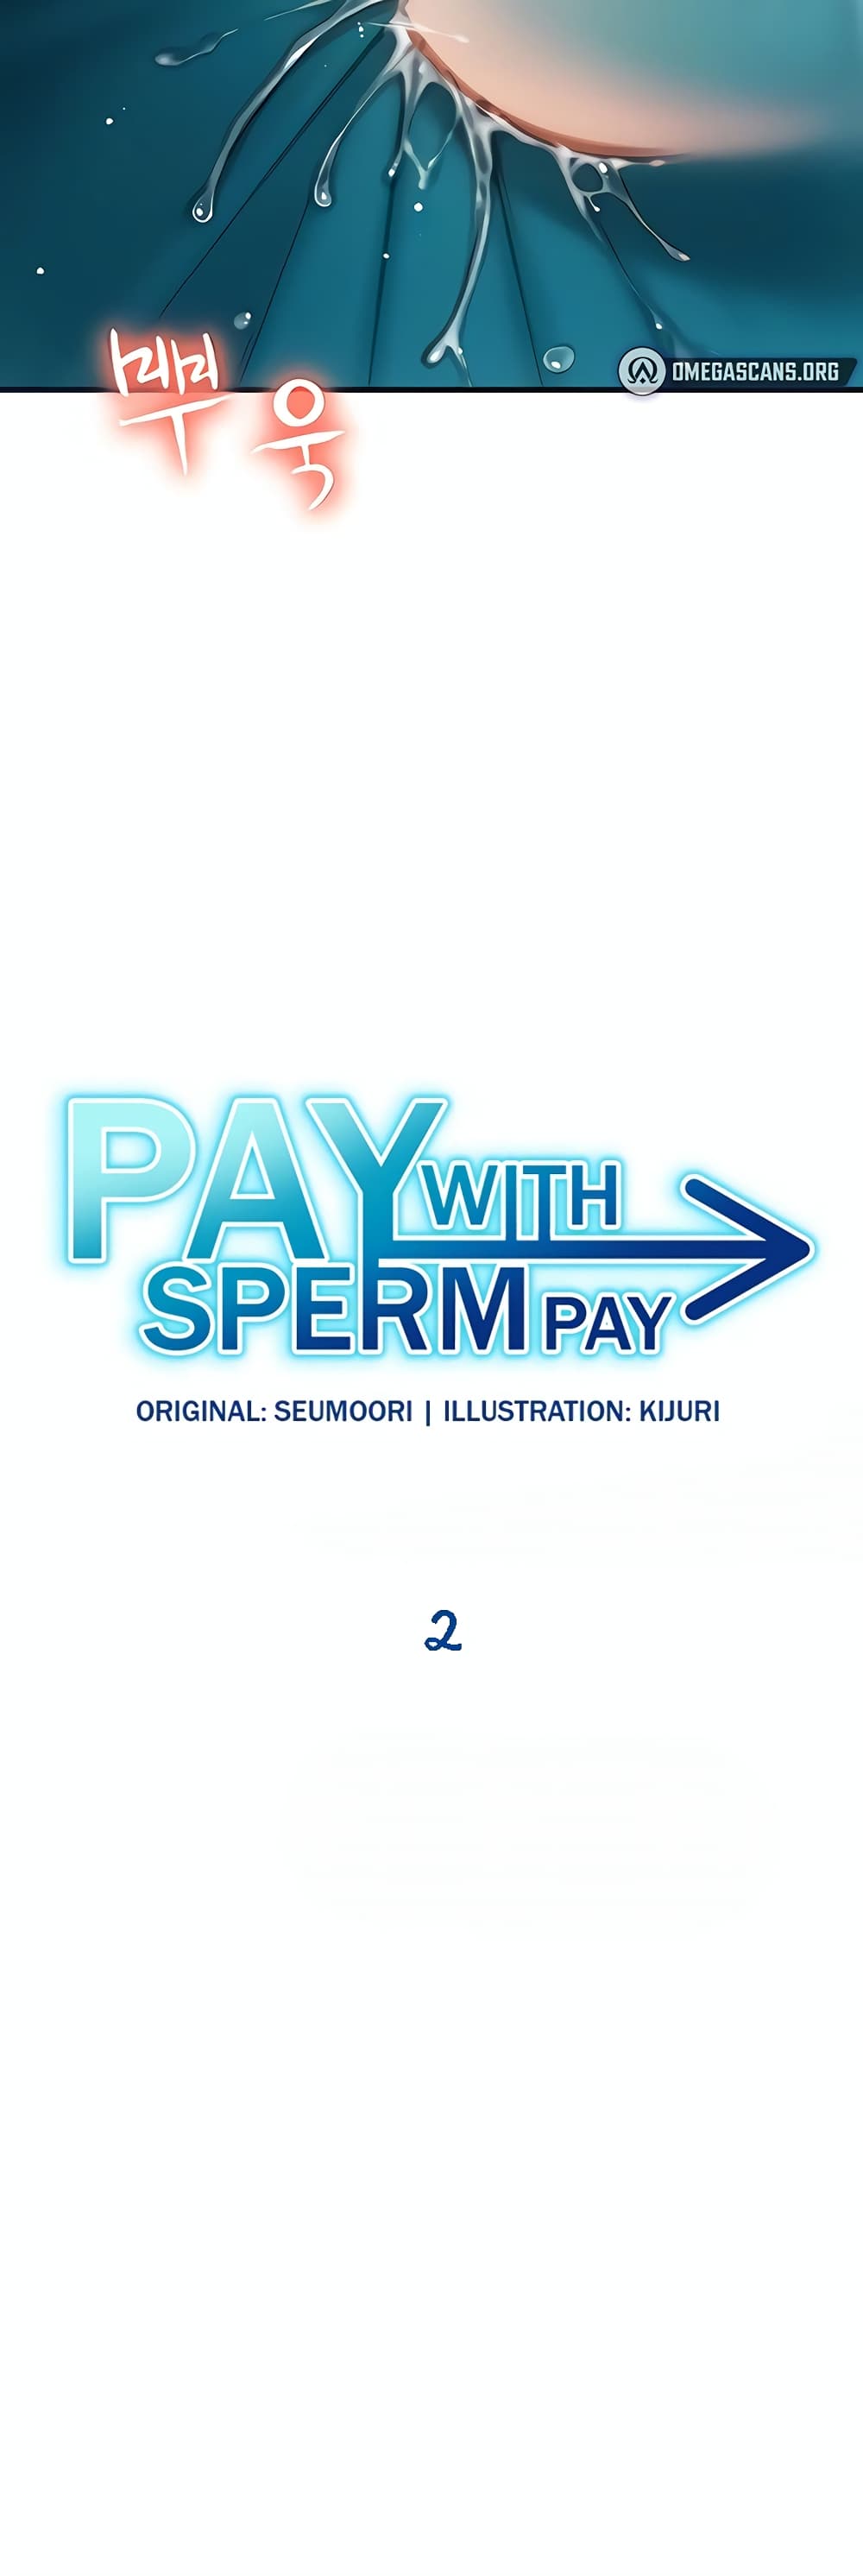 Pay with Sperm Pay 2-2